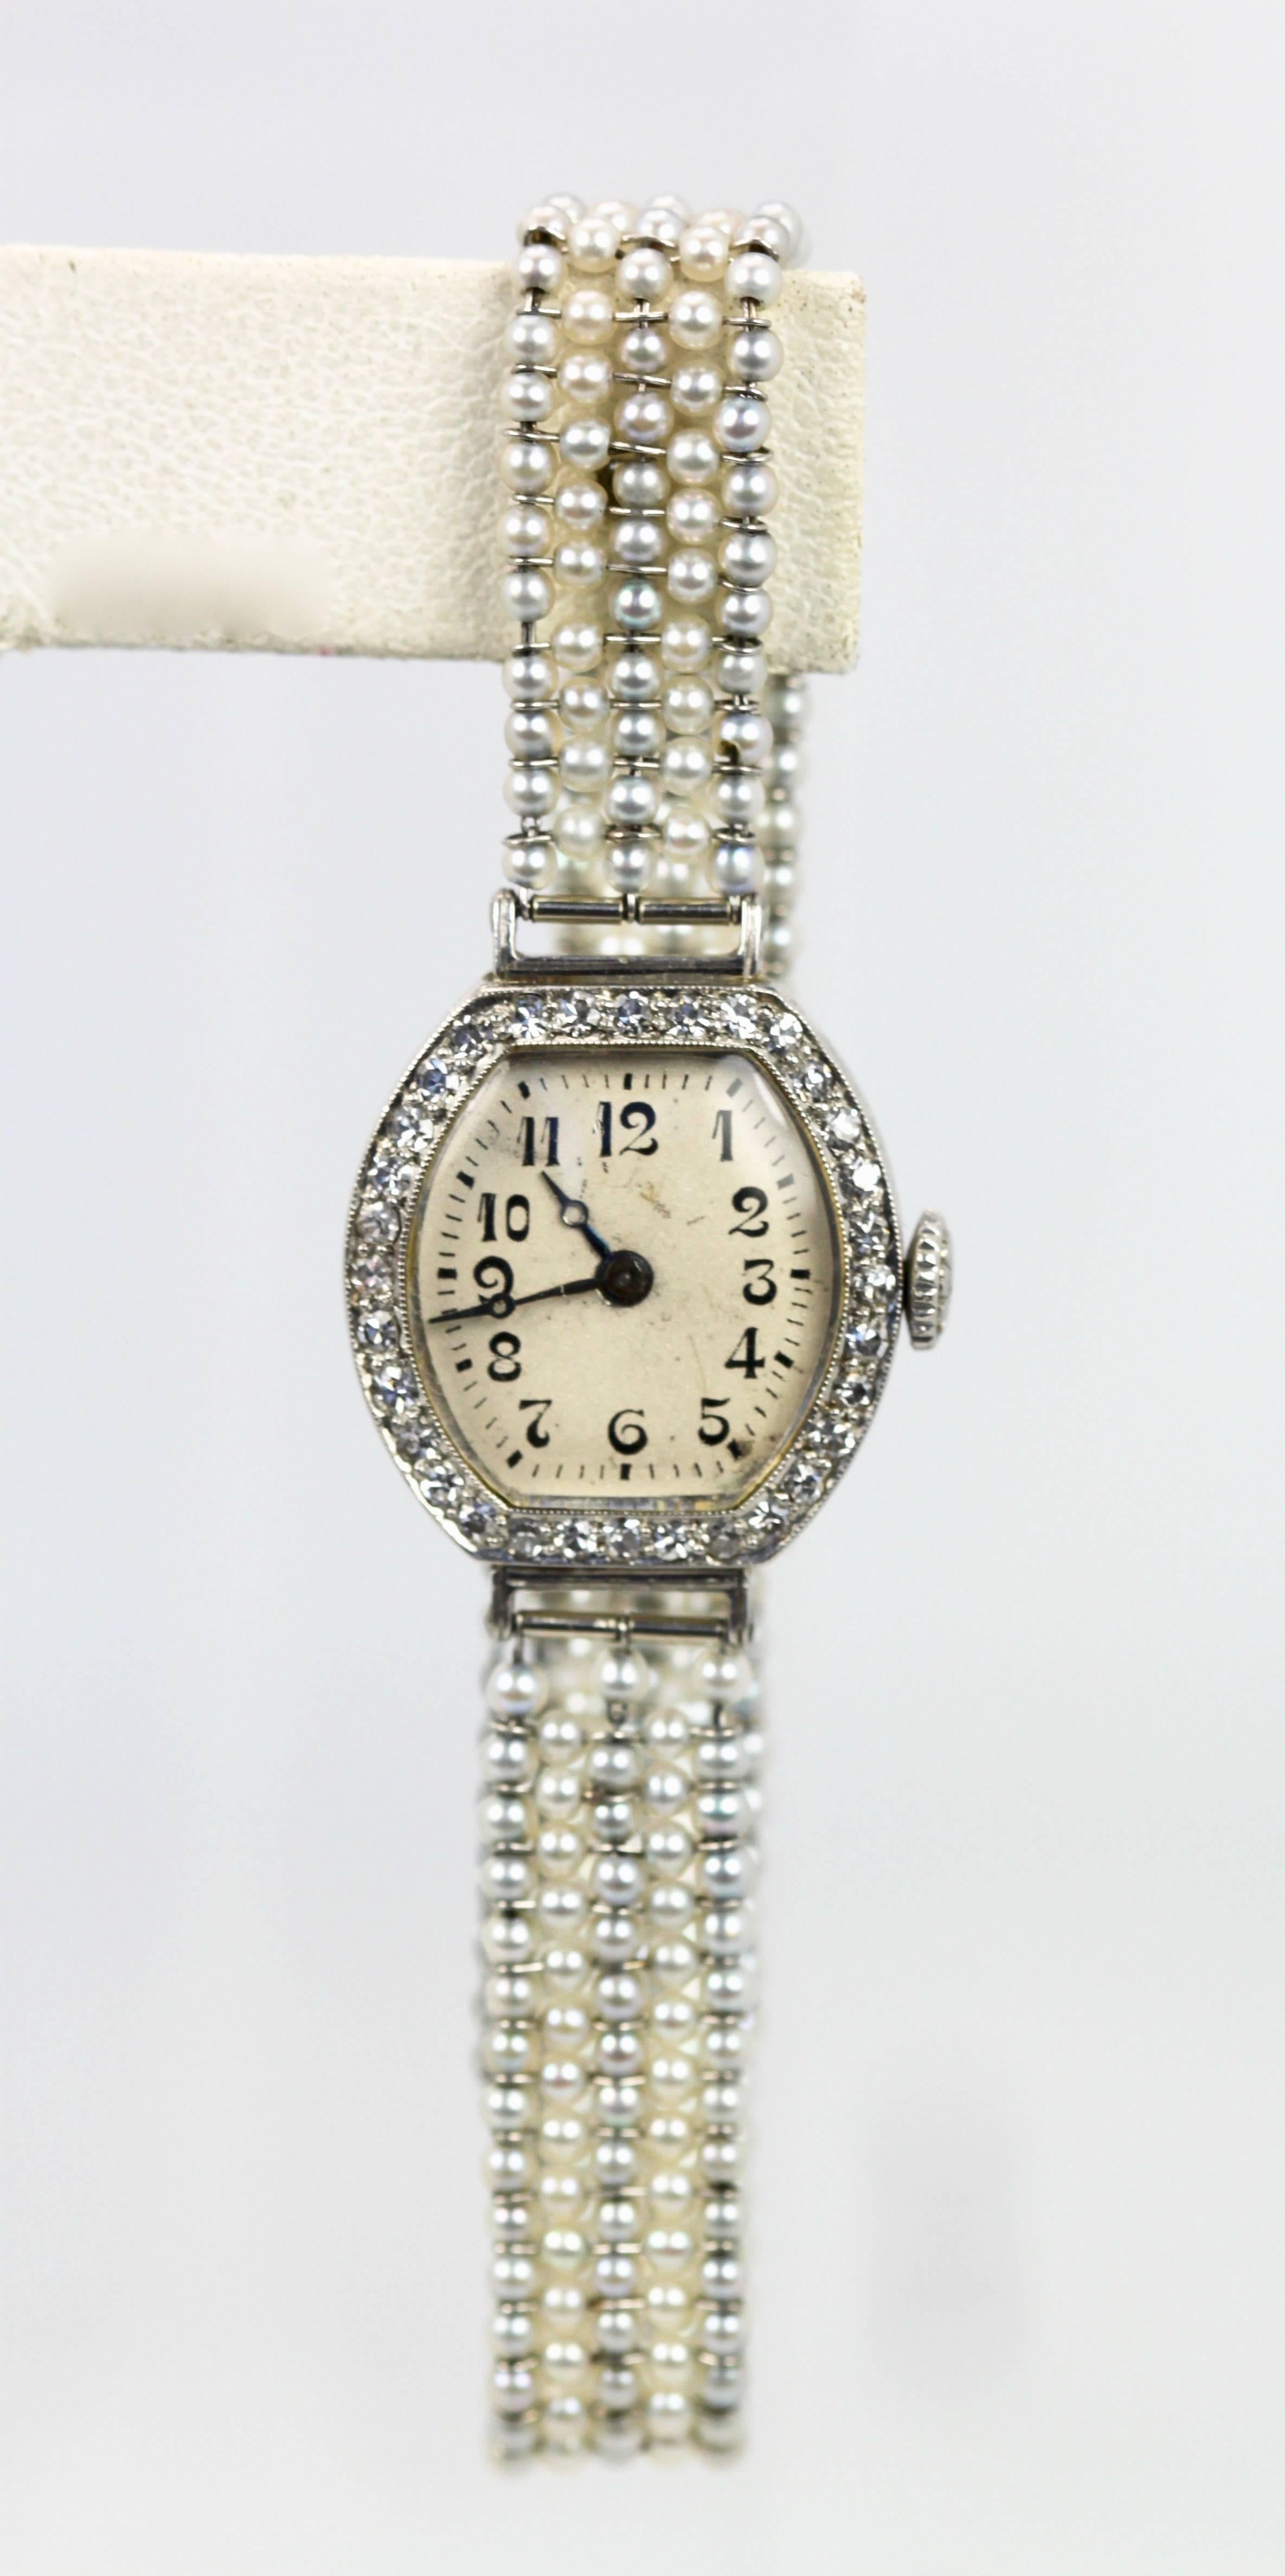 This watch was made during the 1920-30's and is made up of Multi-colored seed pearls as the strap and a Diamond surround.  The seed pearls are natural multi colored and there are 5 rows of pearls.  The Diamond surround consists of 32 round cut